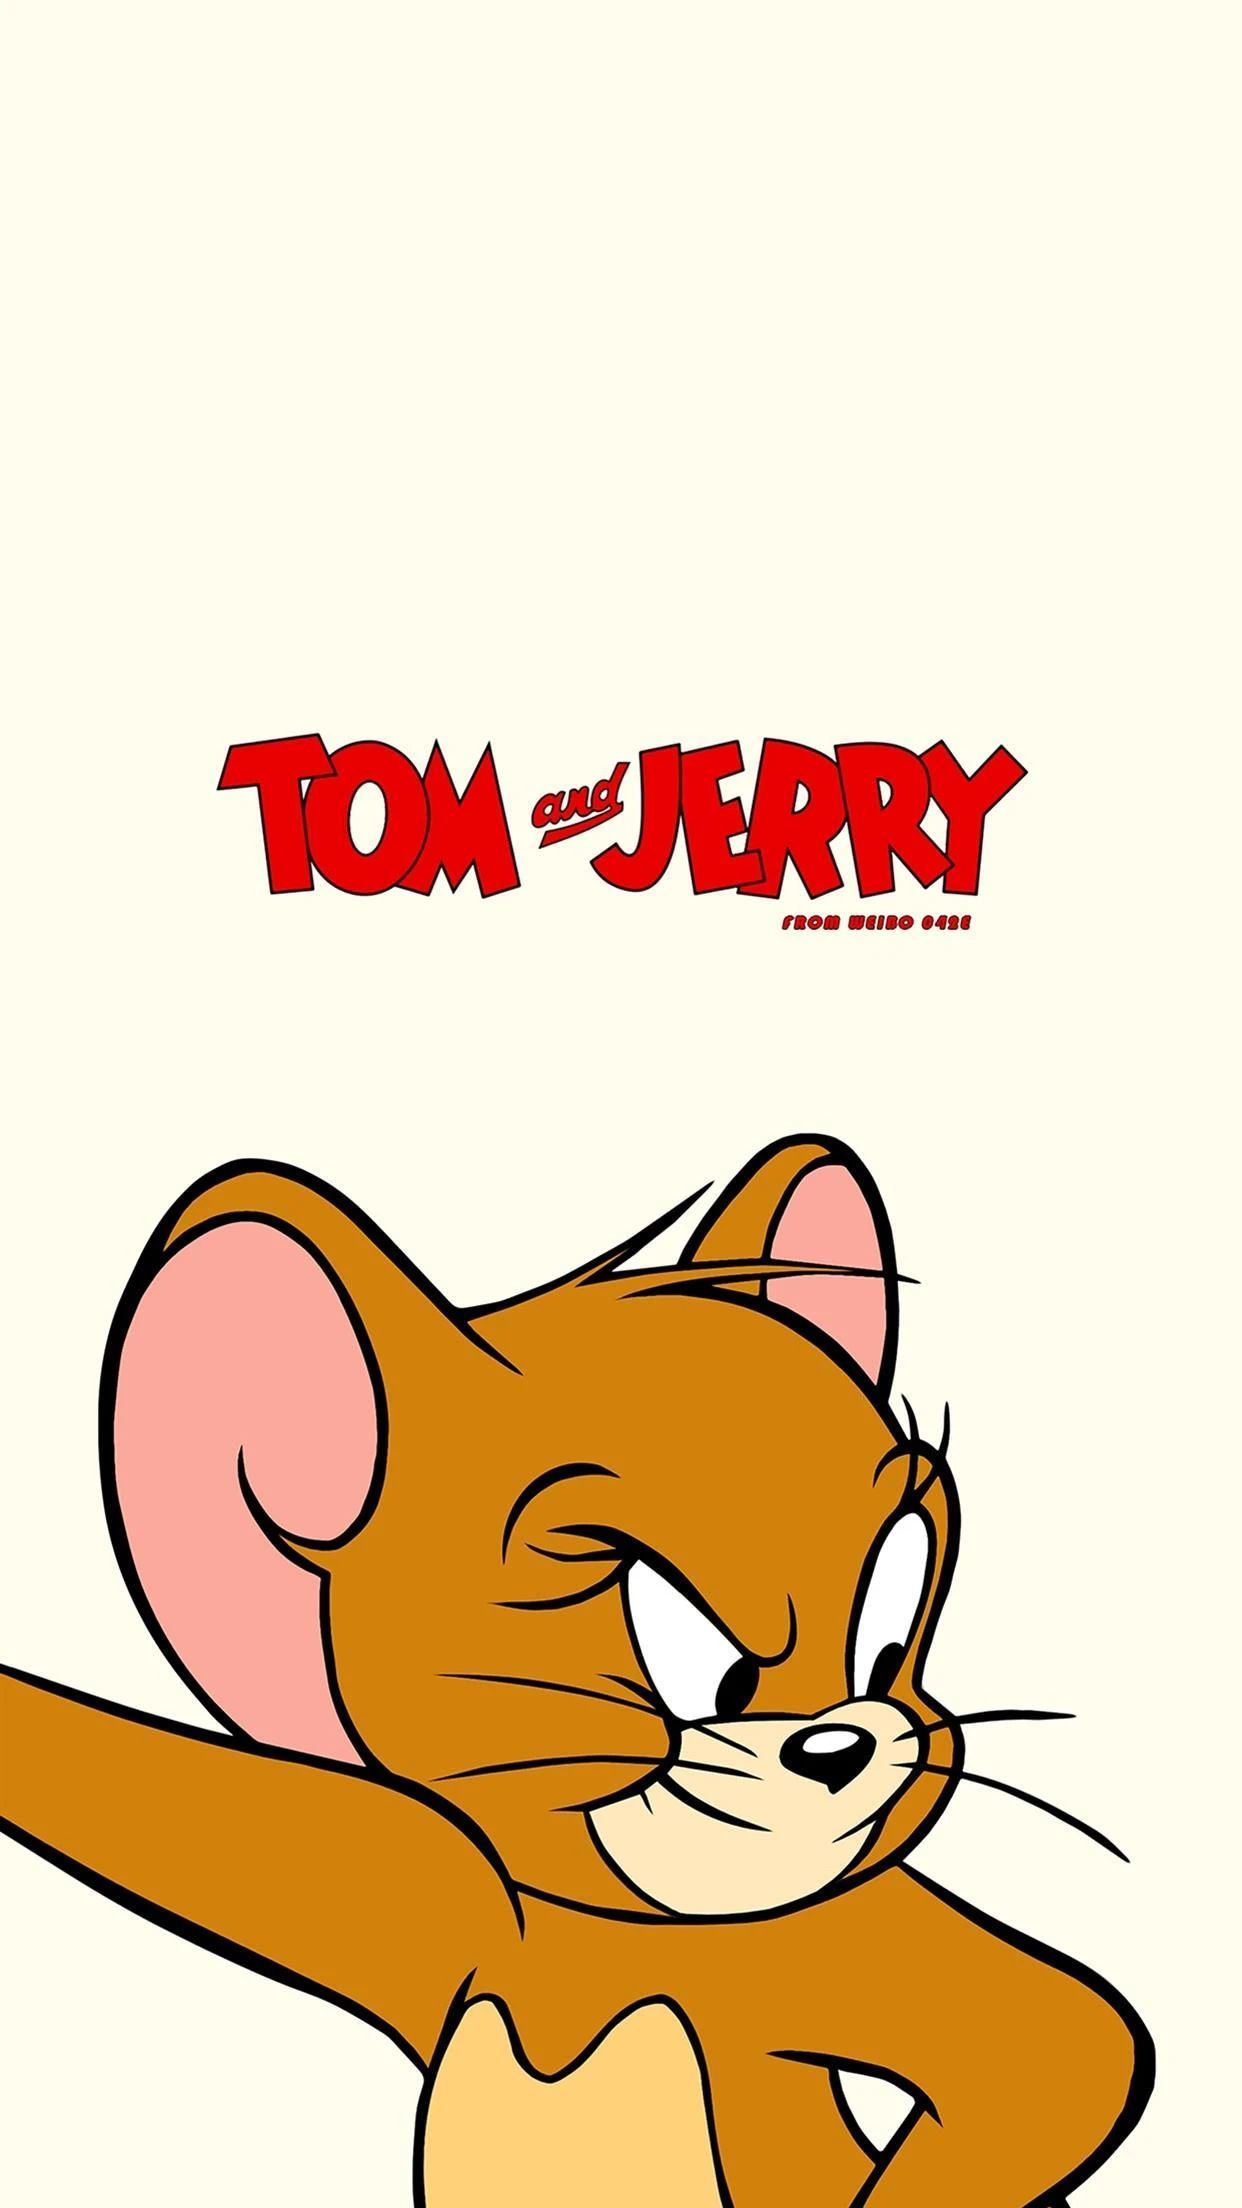 Phone Wallpaper to Commemorate Tom and Jerry's Animator Gene Deitch. Tom and jerry wallpaper, Phone wallpaper, Tom and jerry